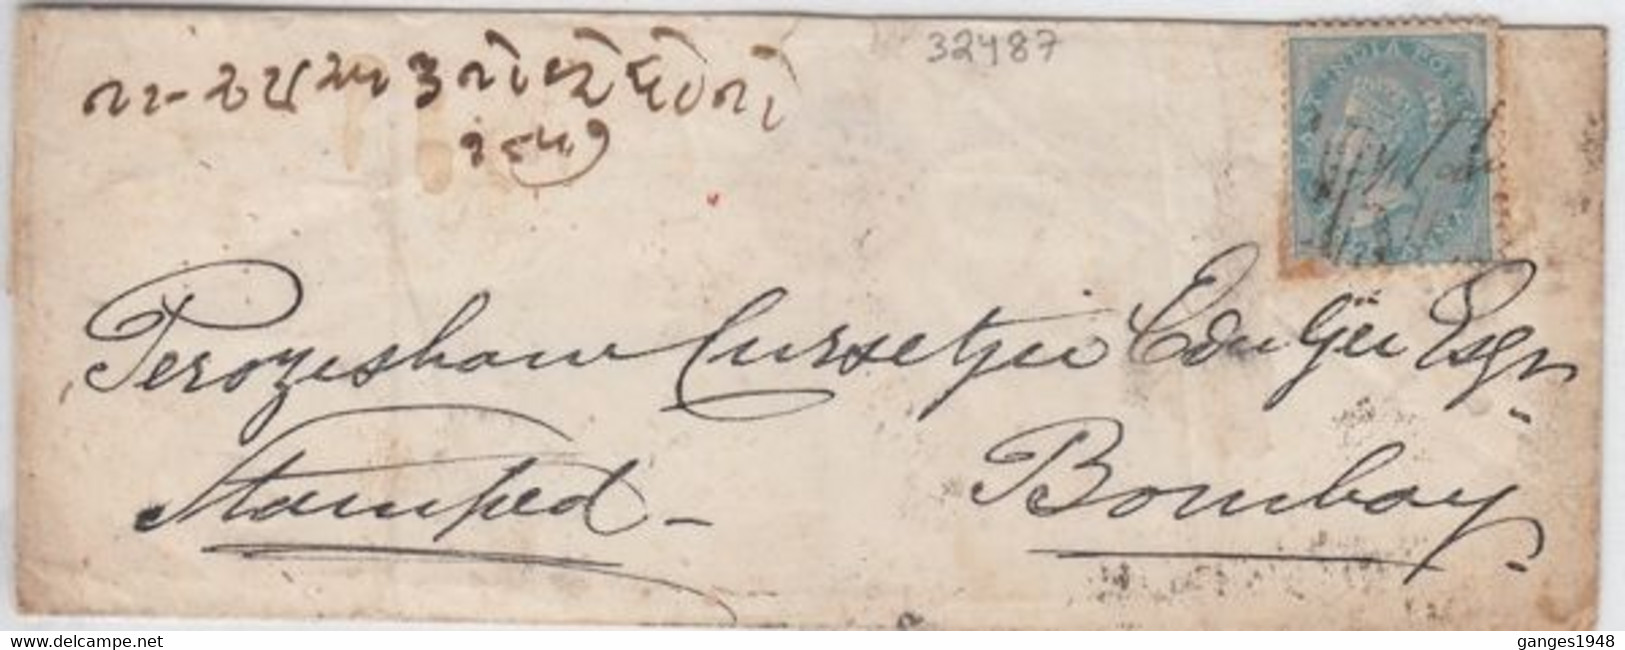 1857 Mutiny Era  QV  1/2A  Franked Cover  Hyderabad To Bombay  #  26229 D  Inde  Indien - 1854 Britse Indische Compagnie